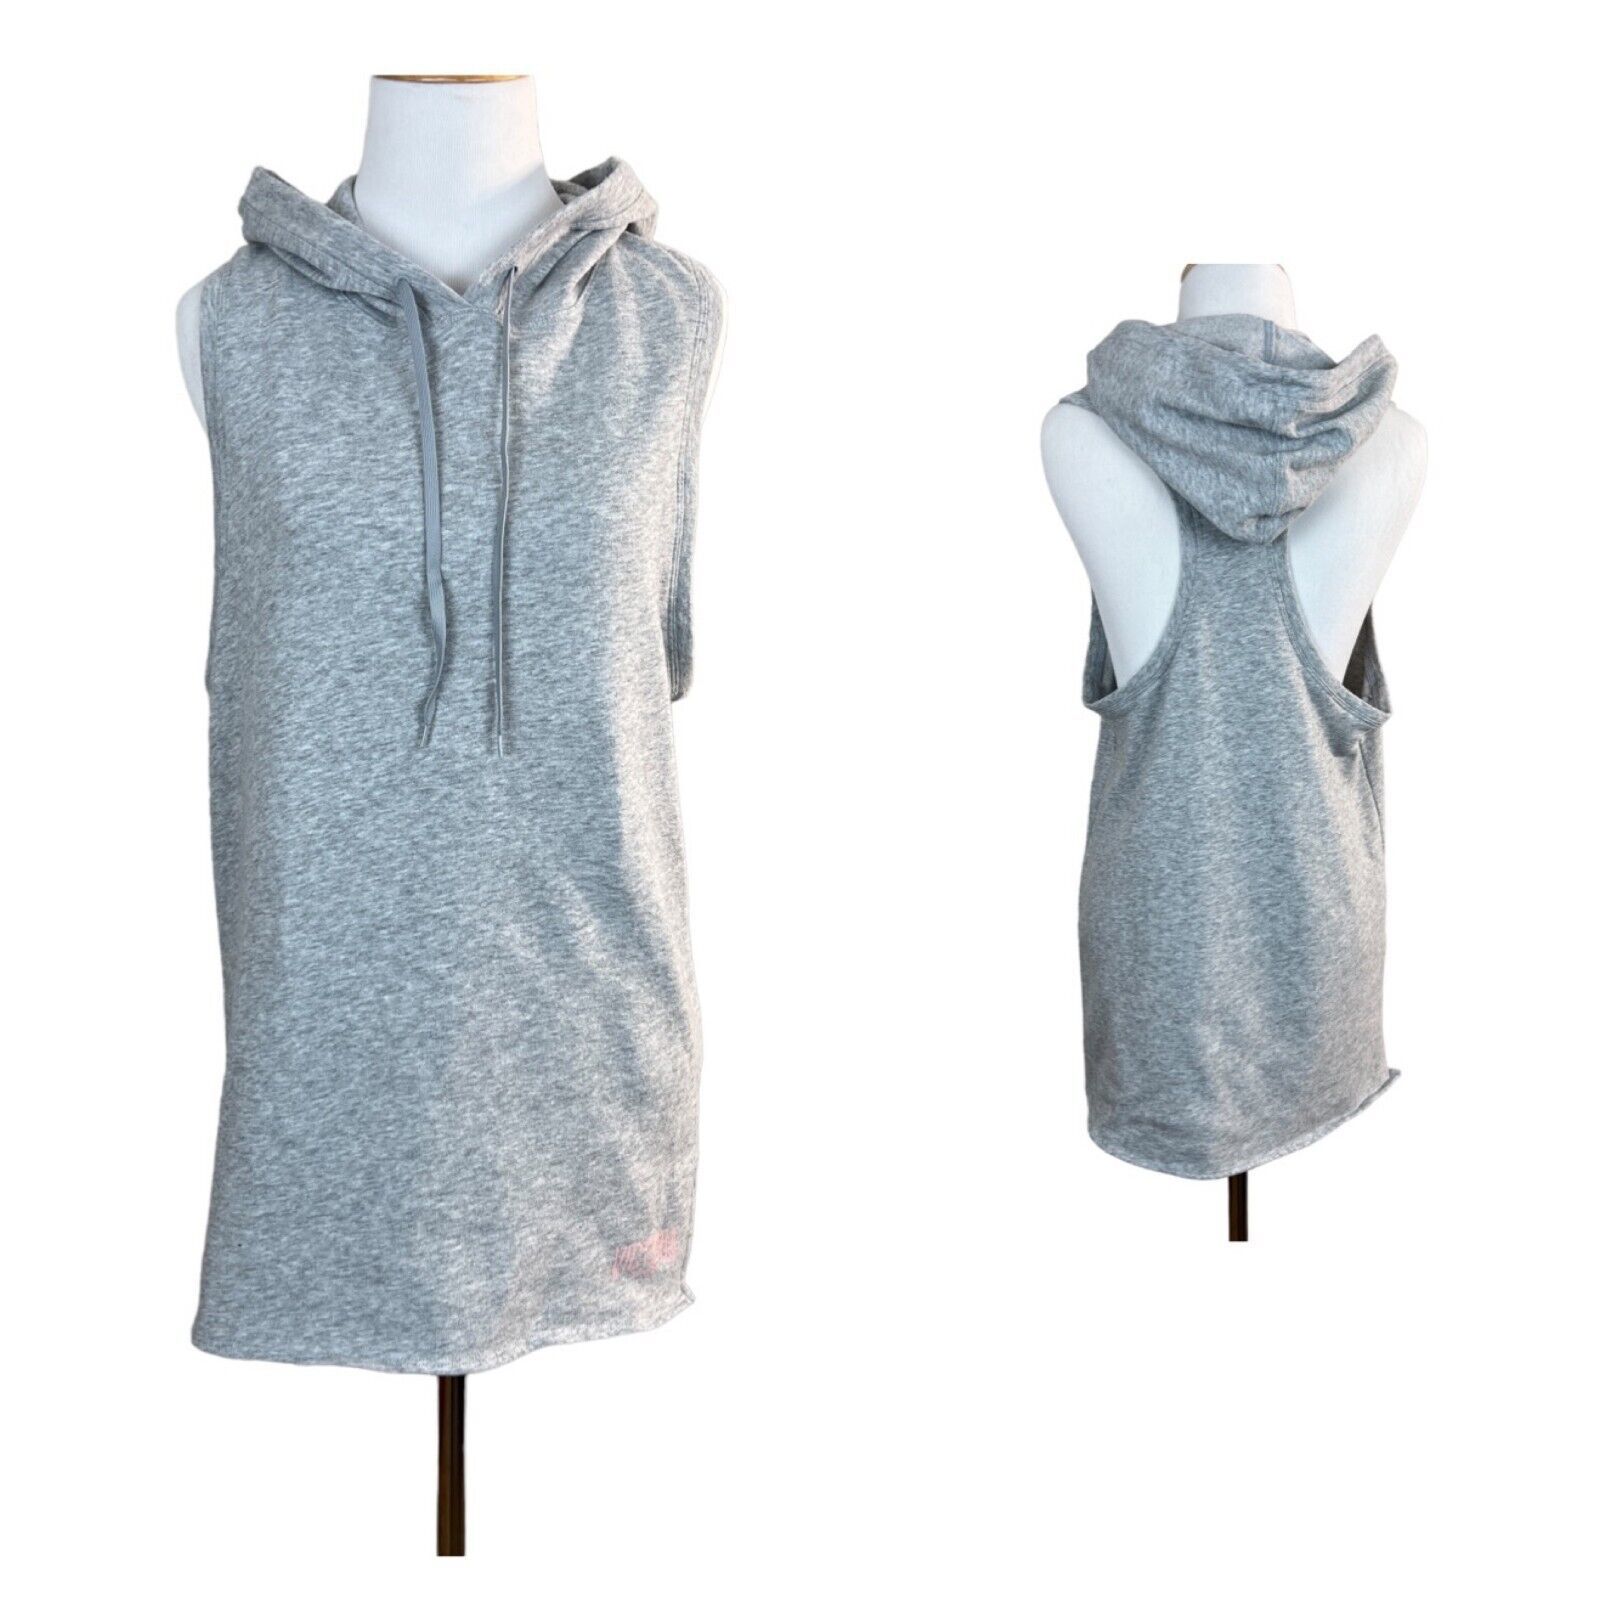 Primary image for Victorias Secret Sport Hoodie Small Gray Racerback Sleeveless Slits Casual Women